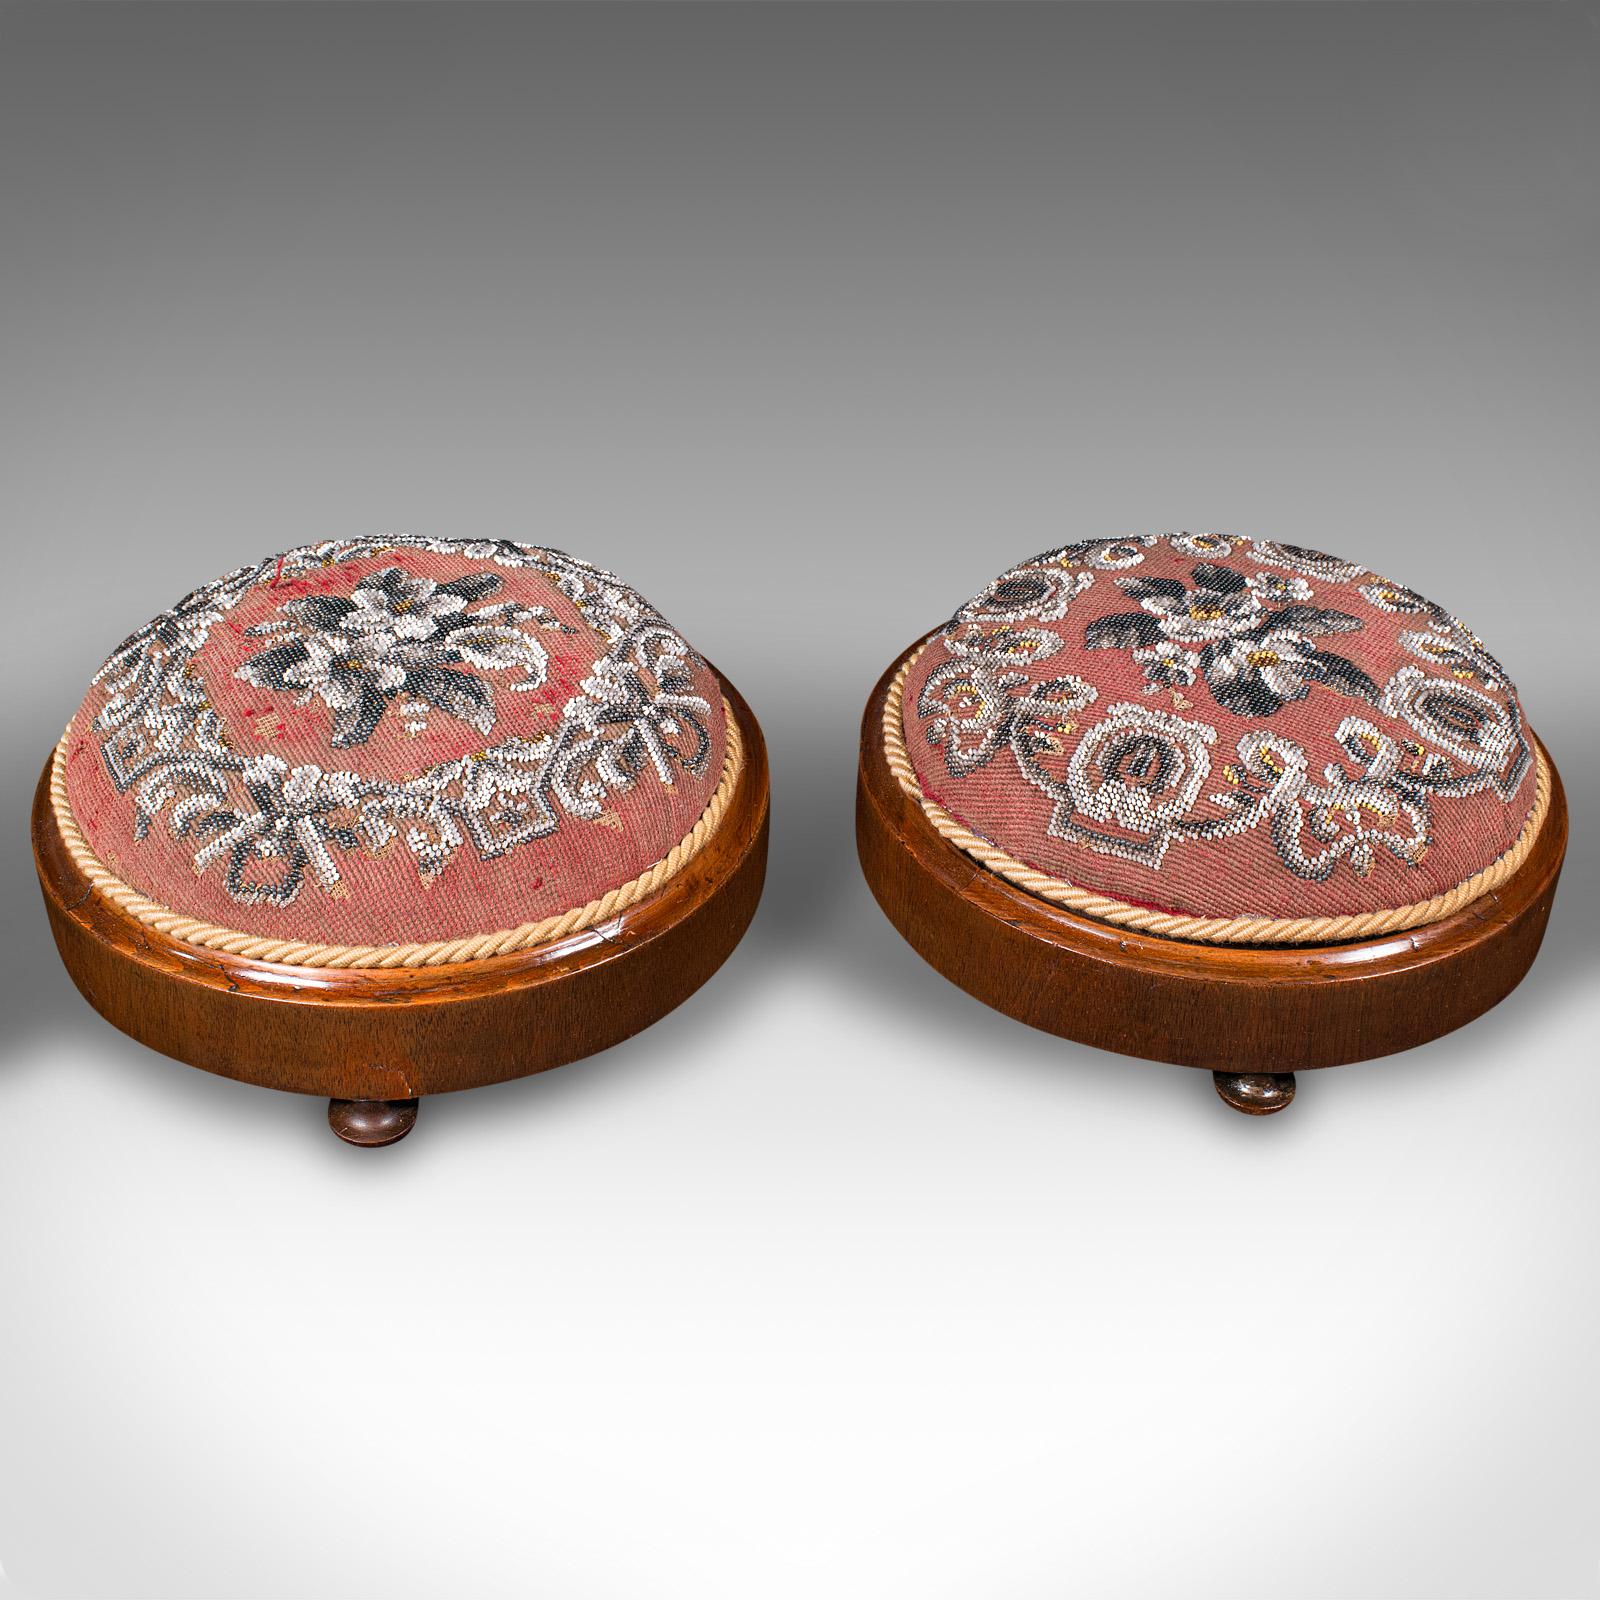 This is a pair of beadwork footstools. An English, mahogany decorative rest, dating to the early Victorian period, circa 1860.

Quality Victorian stools, with appealing decor
Displaying a desirable aged patina with minimal loss
Select stocks present